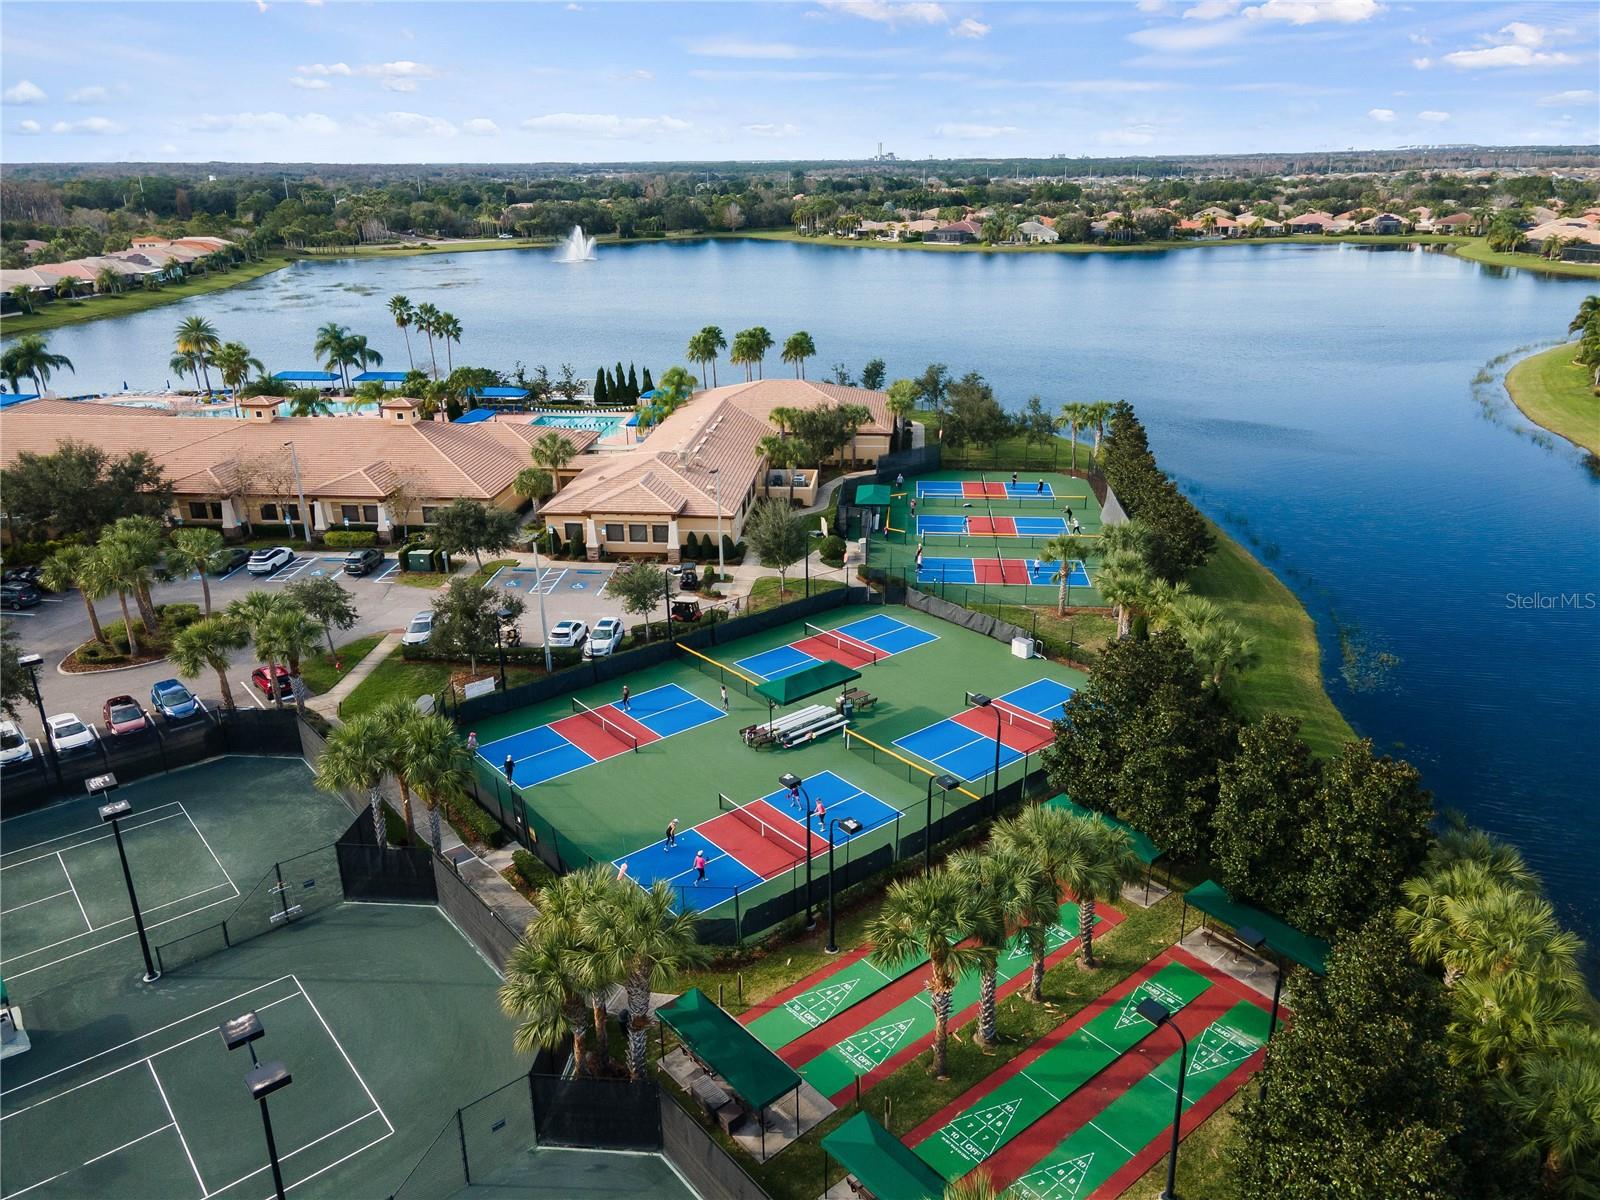 Clubhouse/tennis courts/pickle ball courts/ shuffle board courts